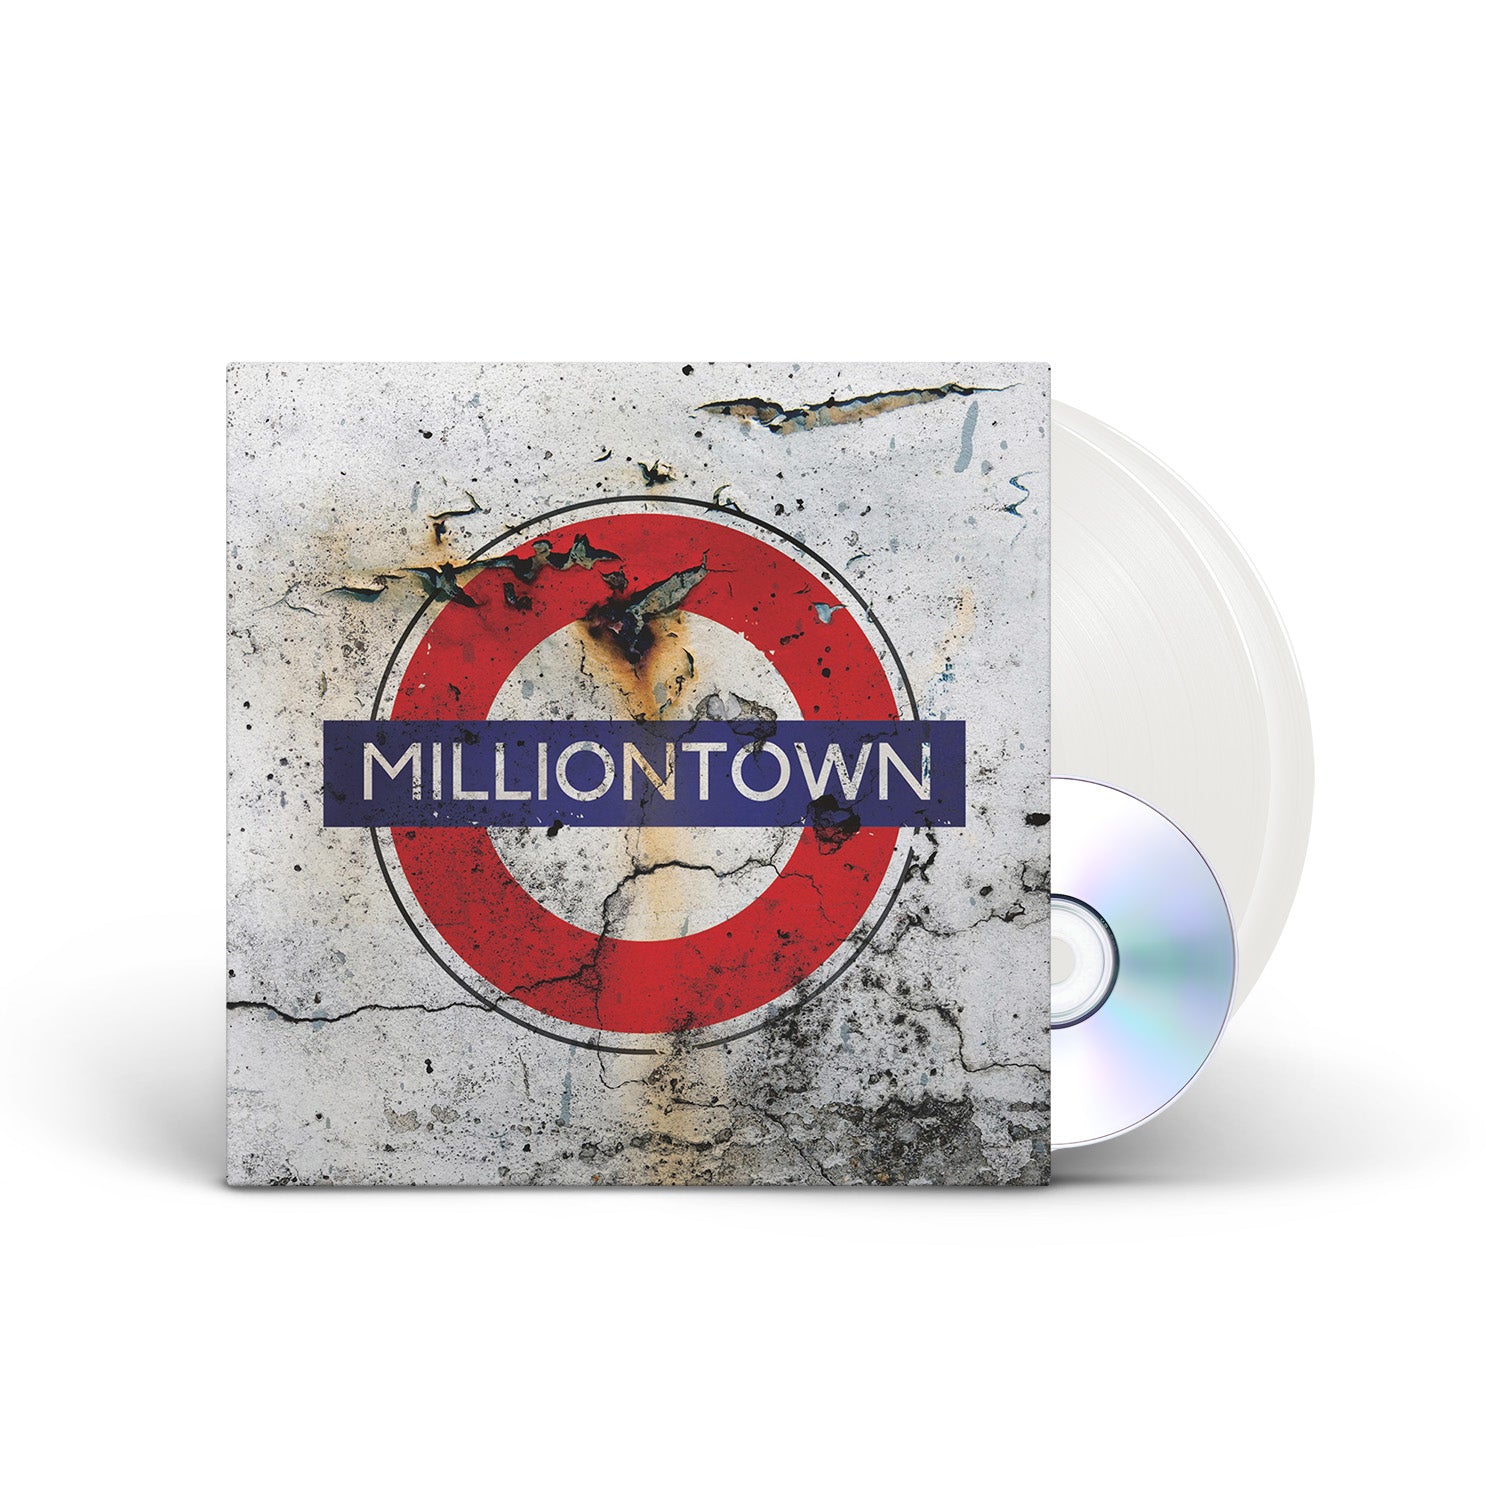 FROST* - Milliontown (Re-issue 2021) - White 2xLP + CD